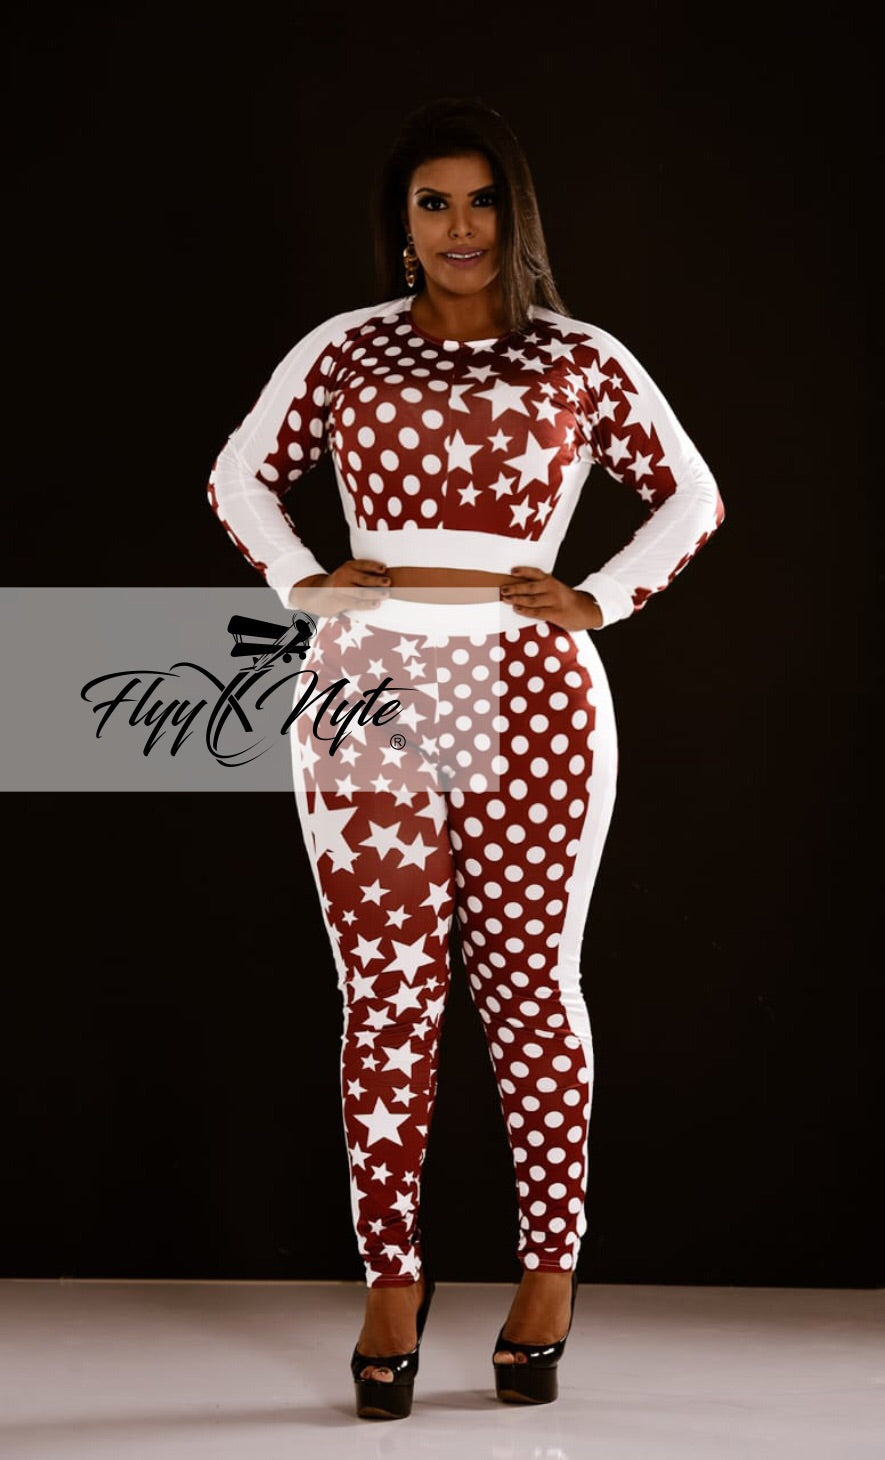 Plus Size 2-Piece Crop Top and Pants Set in Wine and White Stars Print